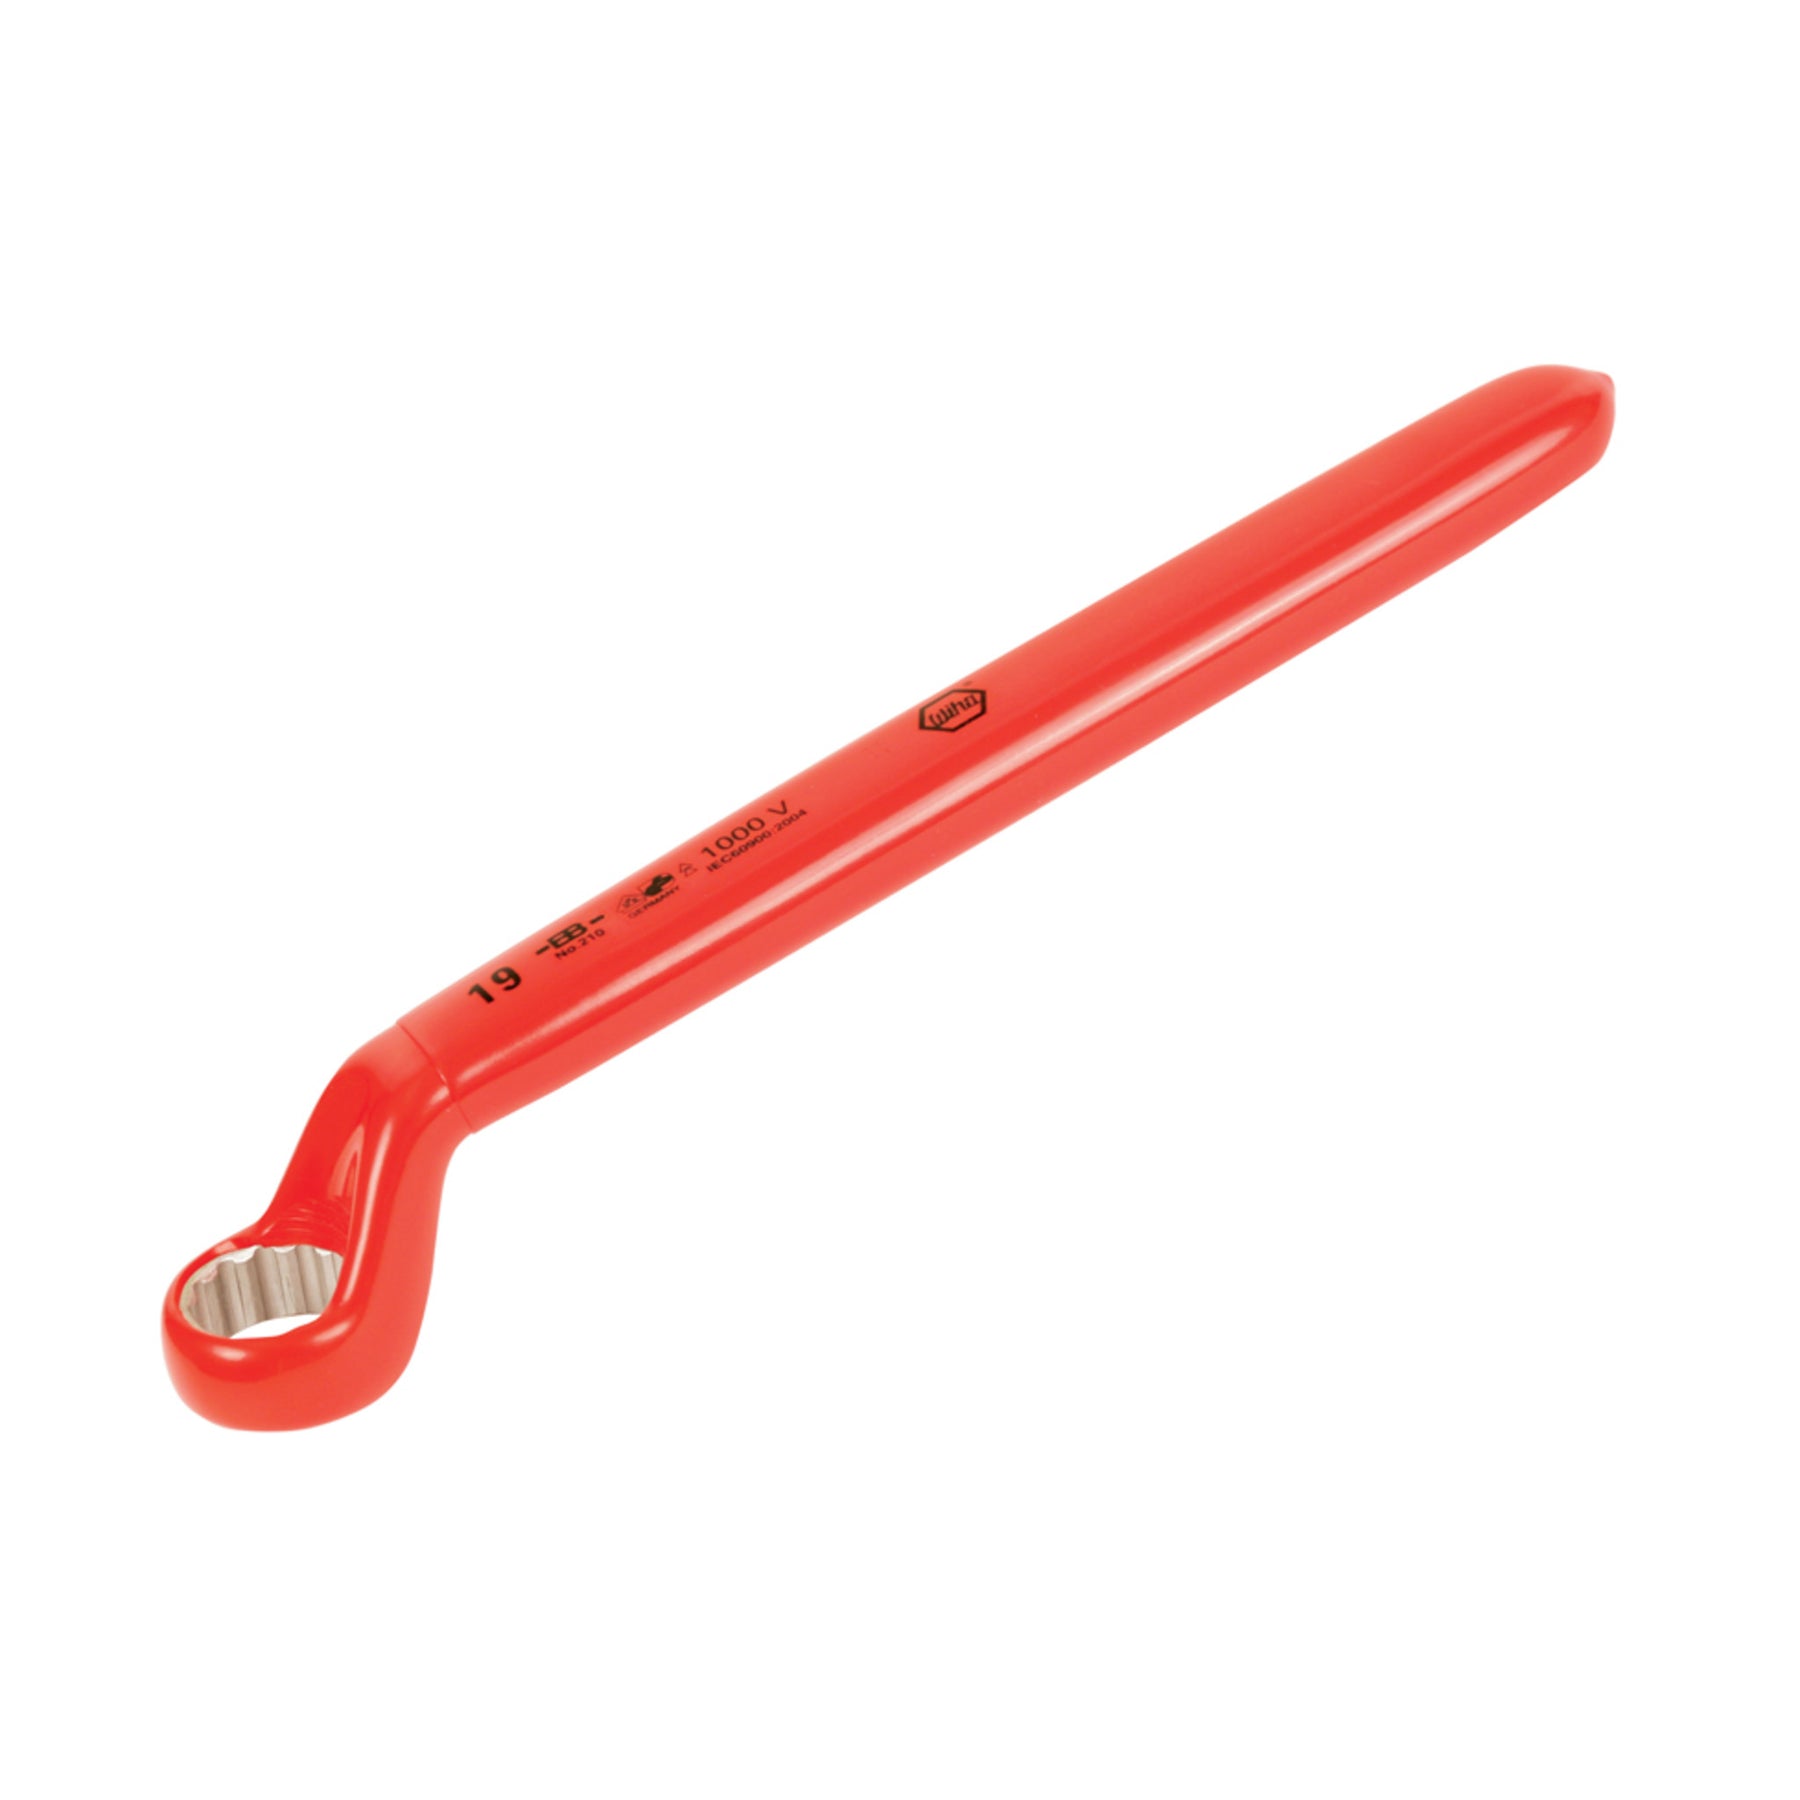 Insulated Deep Offset Wrench 13mm